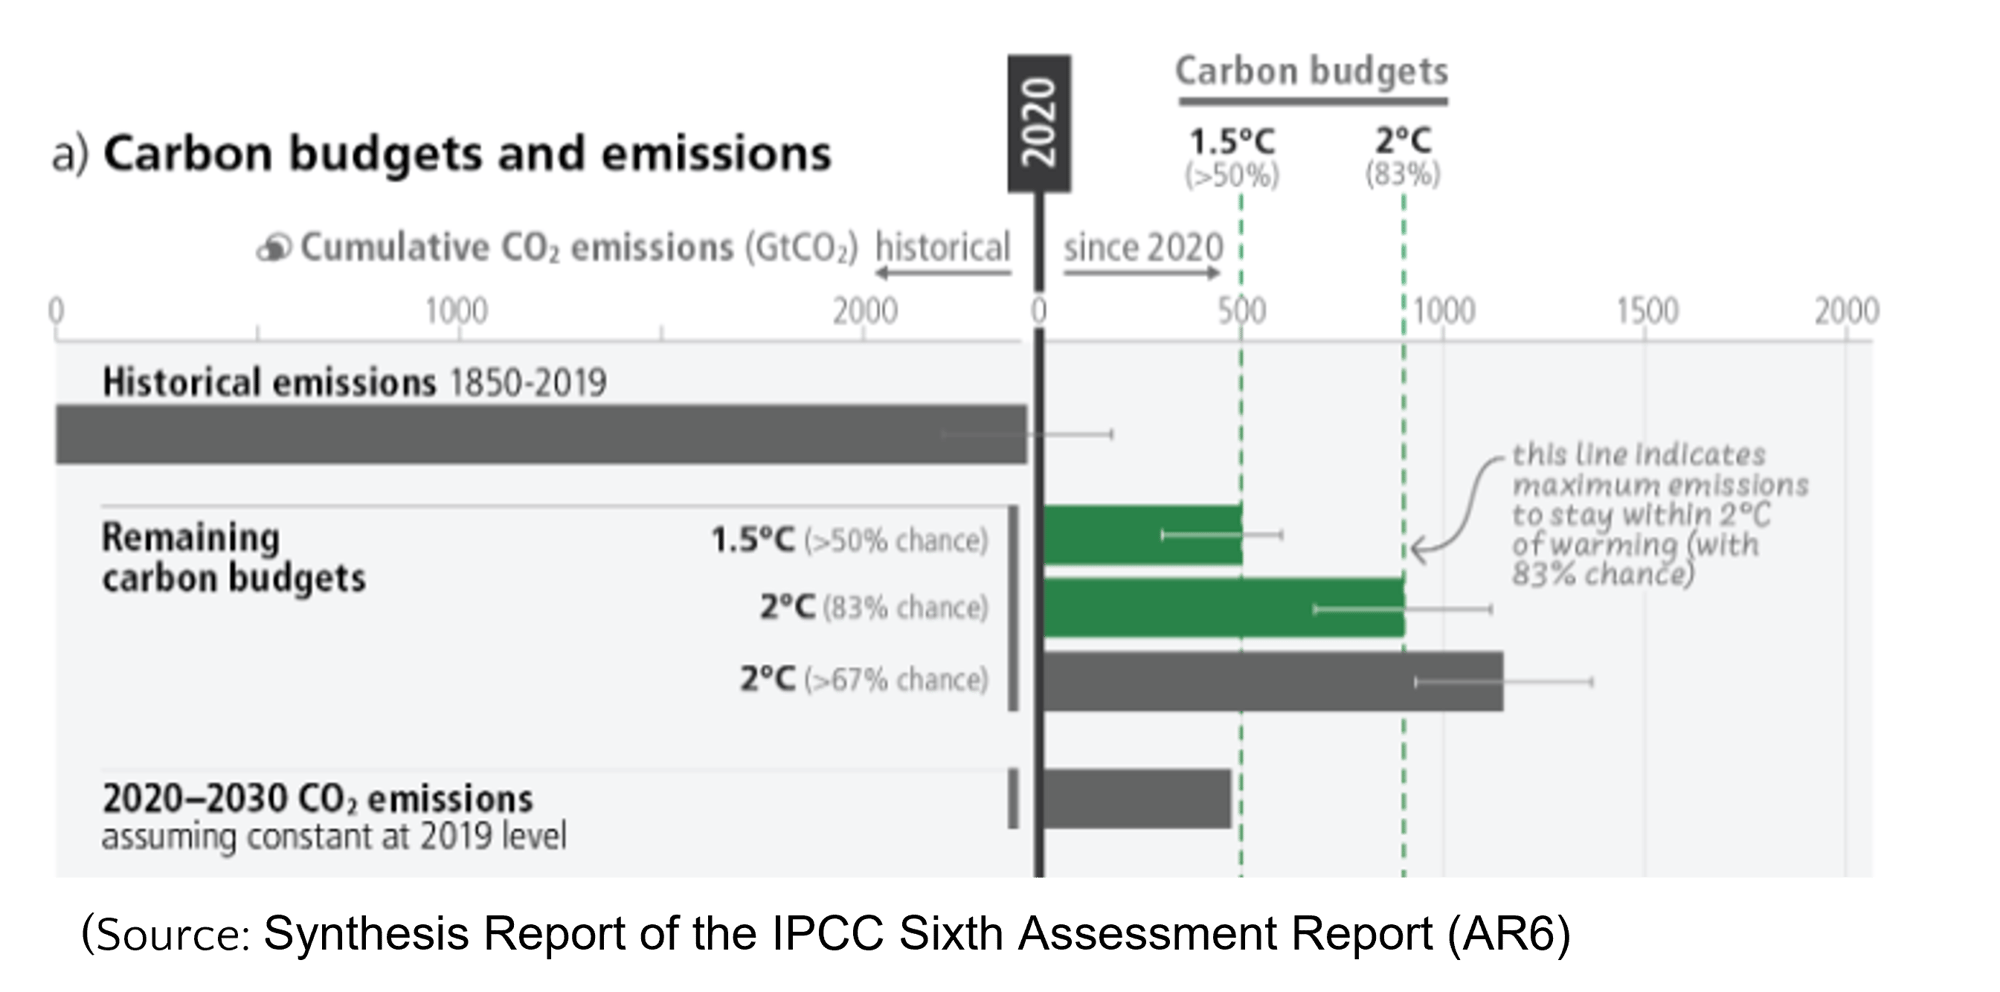 Carbon budgets and emissions